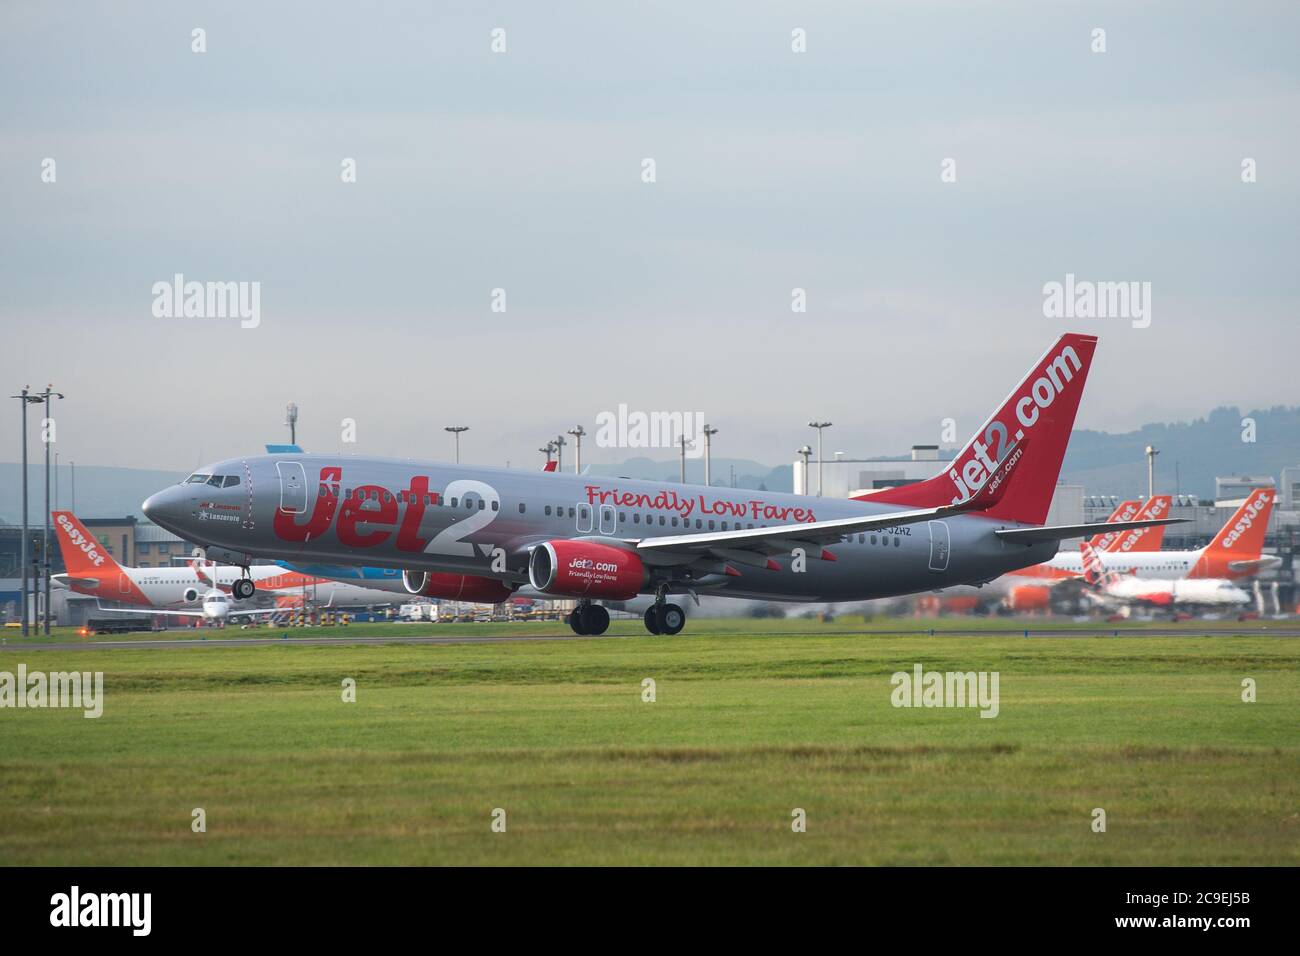 Glasgow, Scotland, UK. 31st July, 2020. Pictured: Jet2 flight LS119 /EXS96BL takes off for the Spanish island of Ibiza from Glasgow Airport. Jet2 announced earlier on this week that it was not flying passengers to Spain or its islands due to coronavirus cases reemerging. Todays flight looks like it is going out empty, perhaps to pick up returning holiday makers who will have to quarantine for 14 days when they return. Ironically today' s weather is forecast to be hotter in Glasgow than Hawaii. Credit: Colin Fisher/Alamy Live News Stock Photo